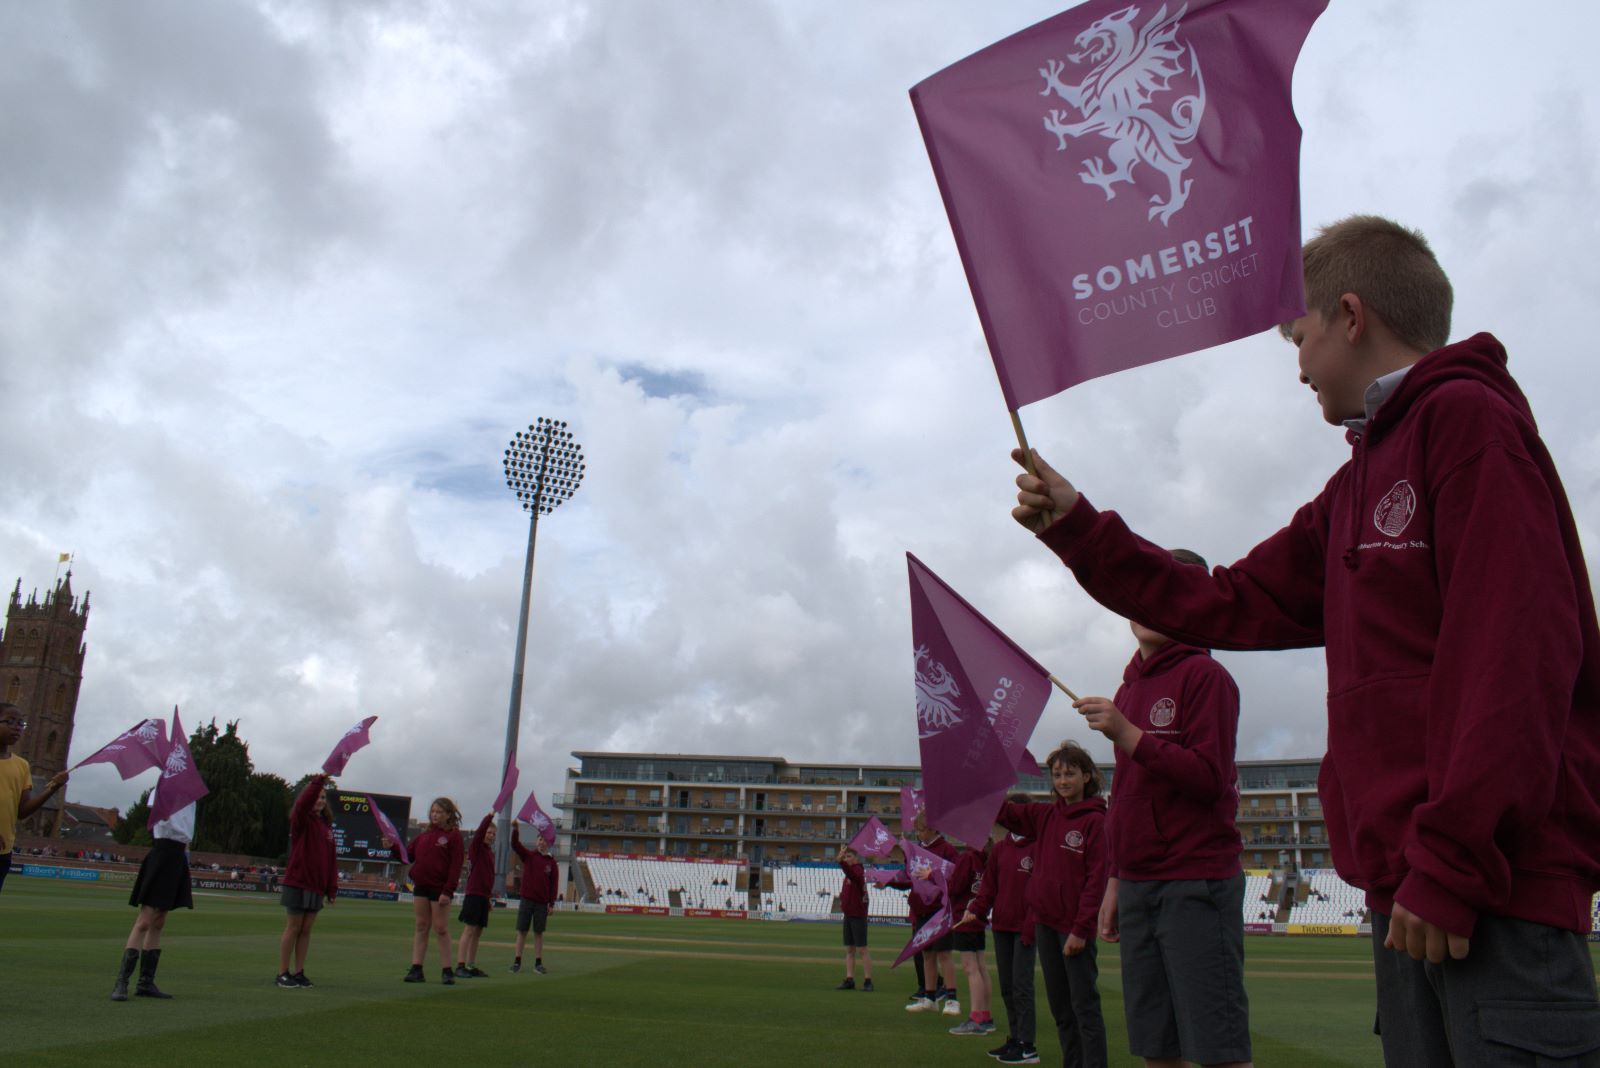 Students from Ashburton Primary School perform the Guard of Honour ahead of Day 1 of Somerset CCC vs Hampshire CCC.